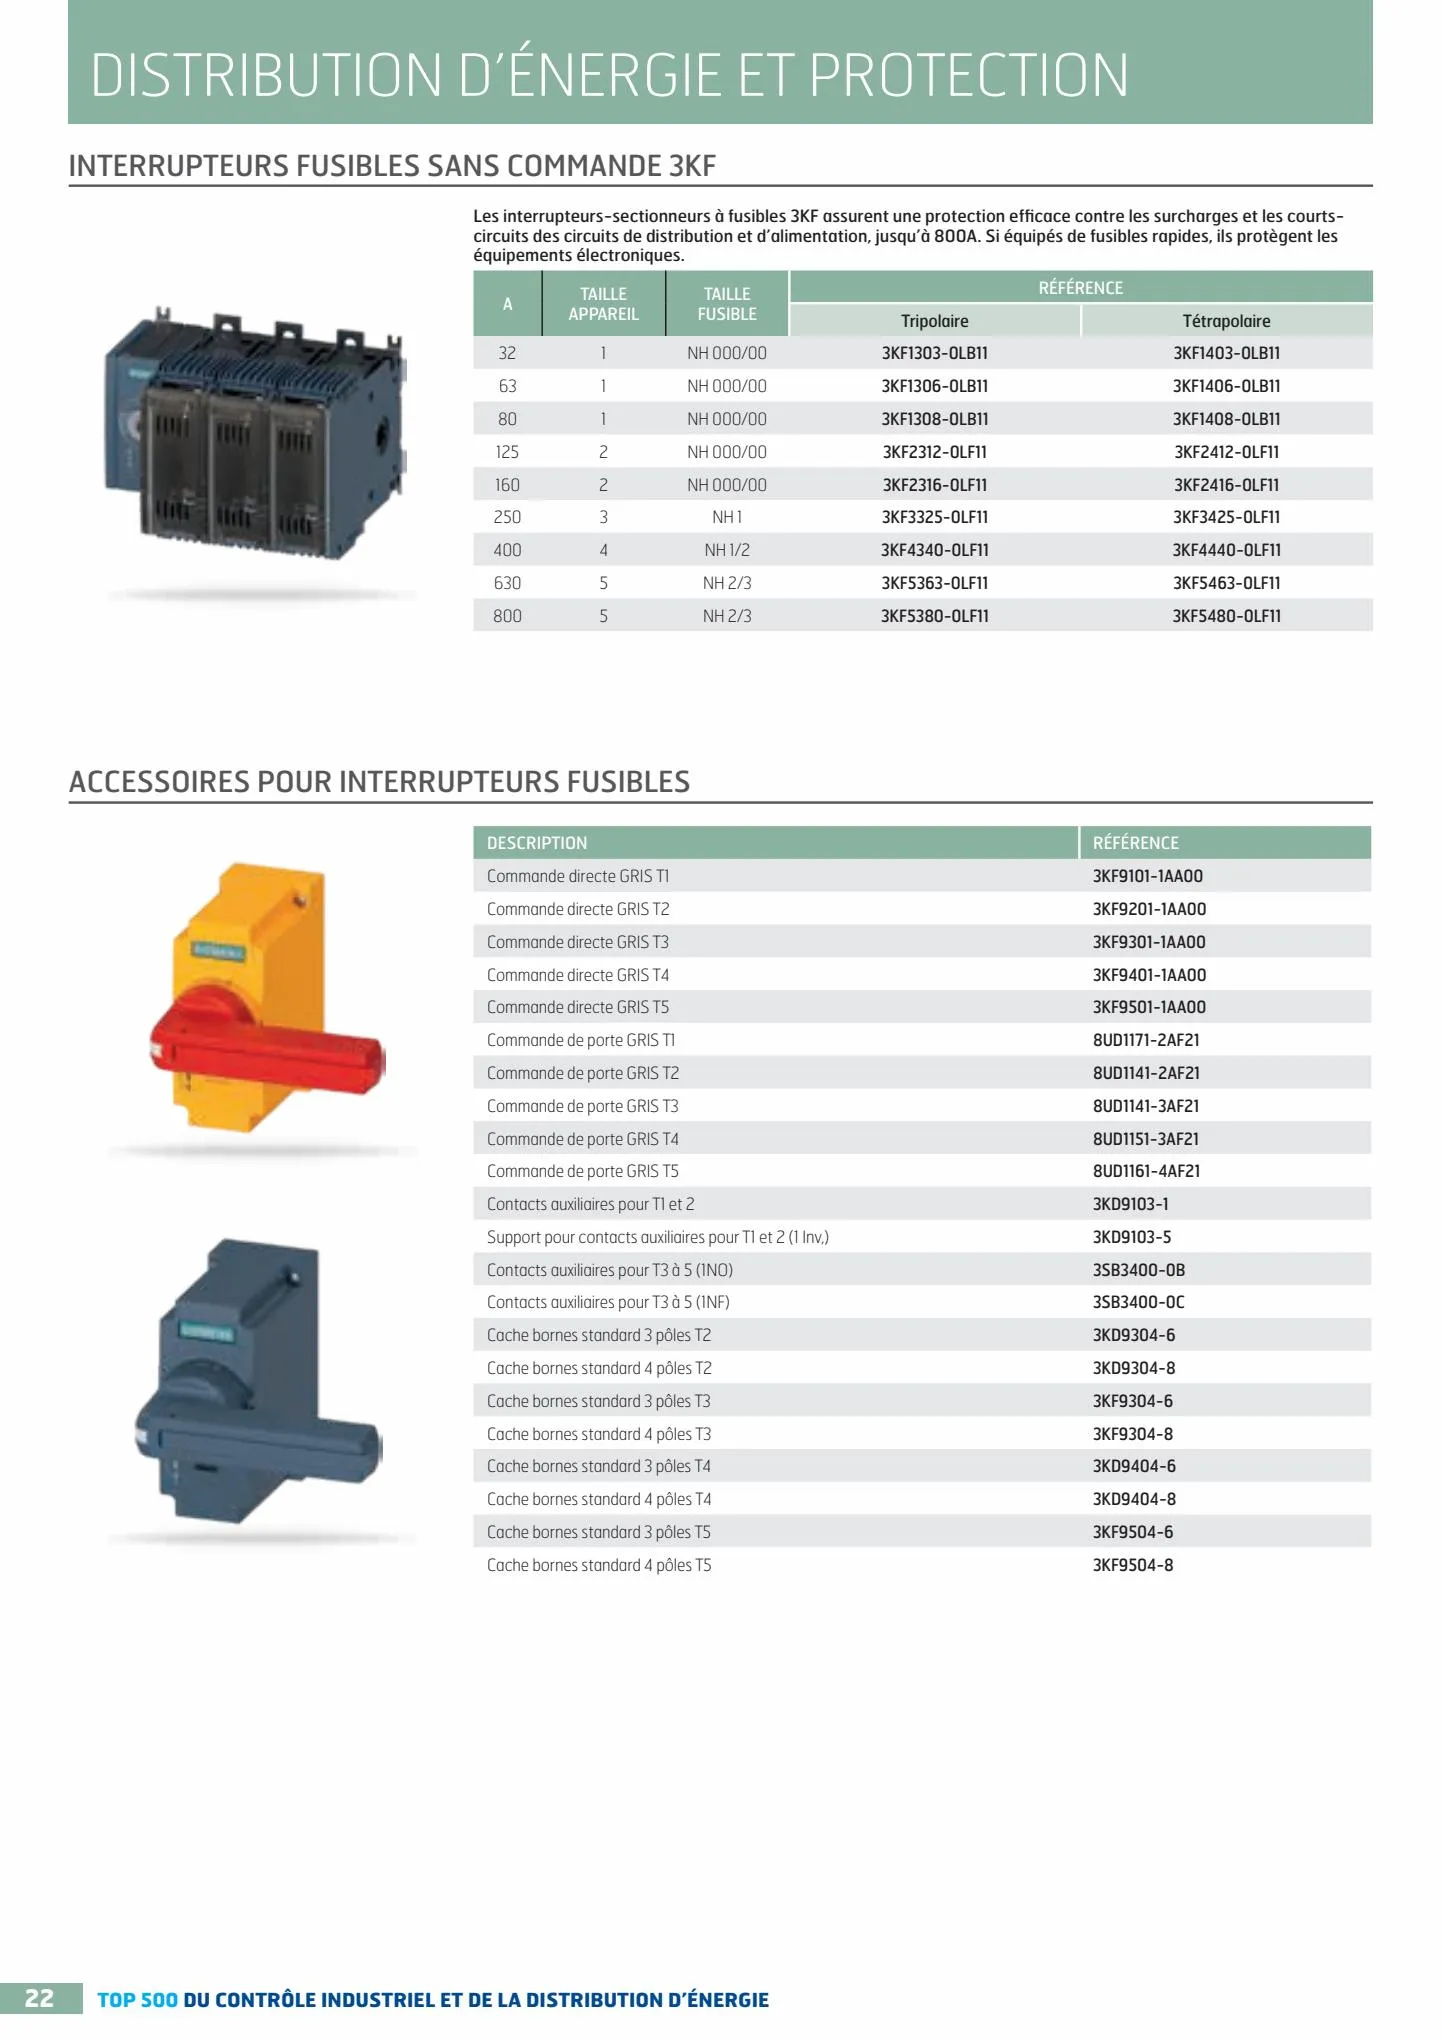 Catalogue TOP 500 siemens, page 00022